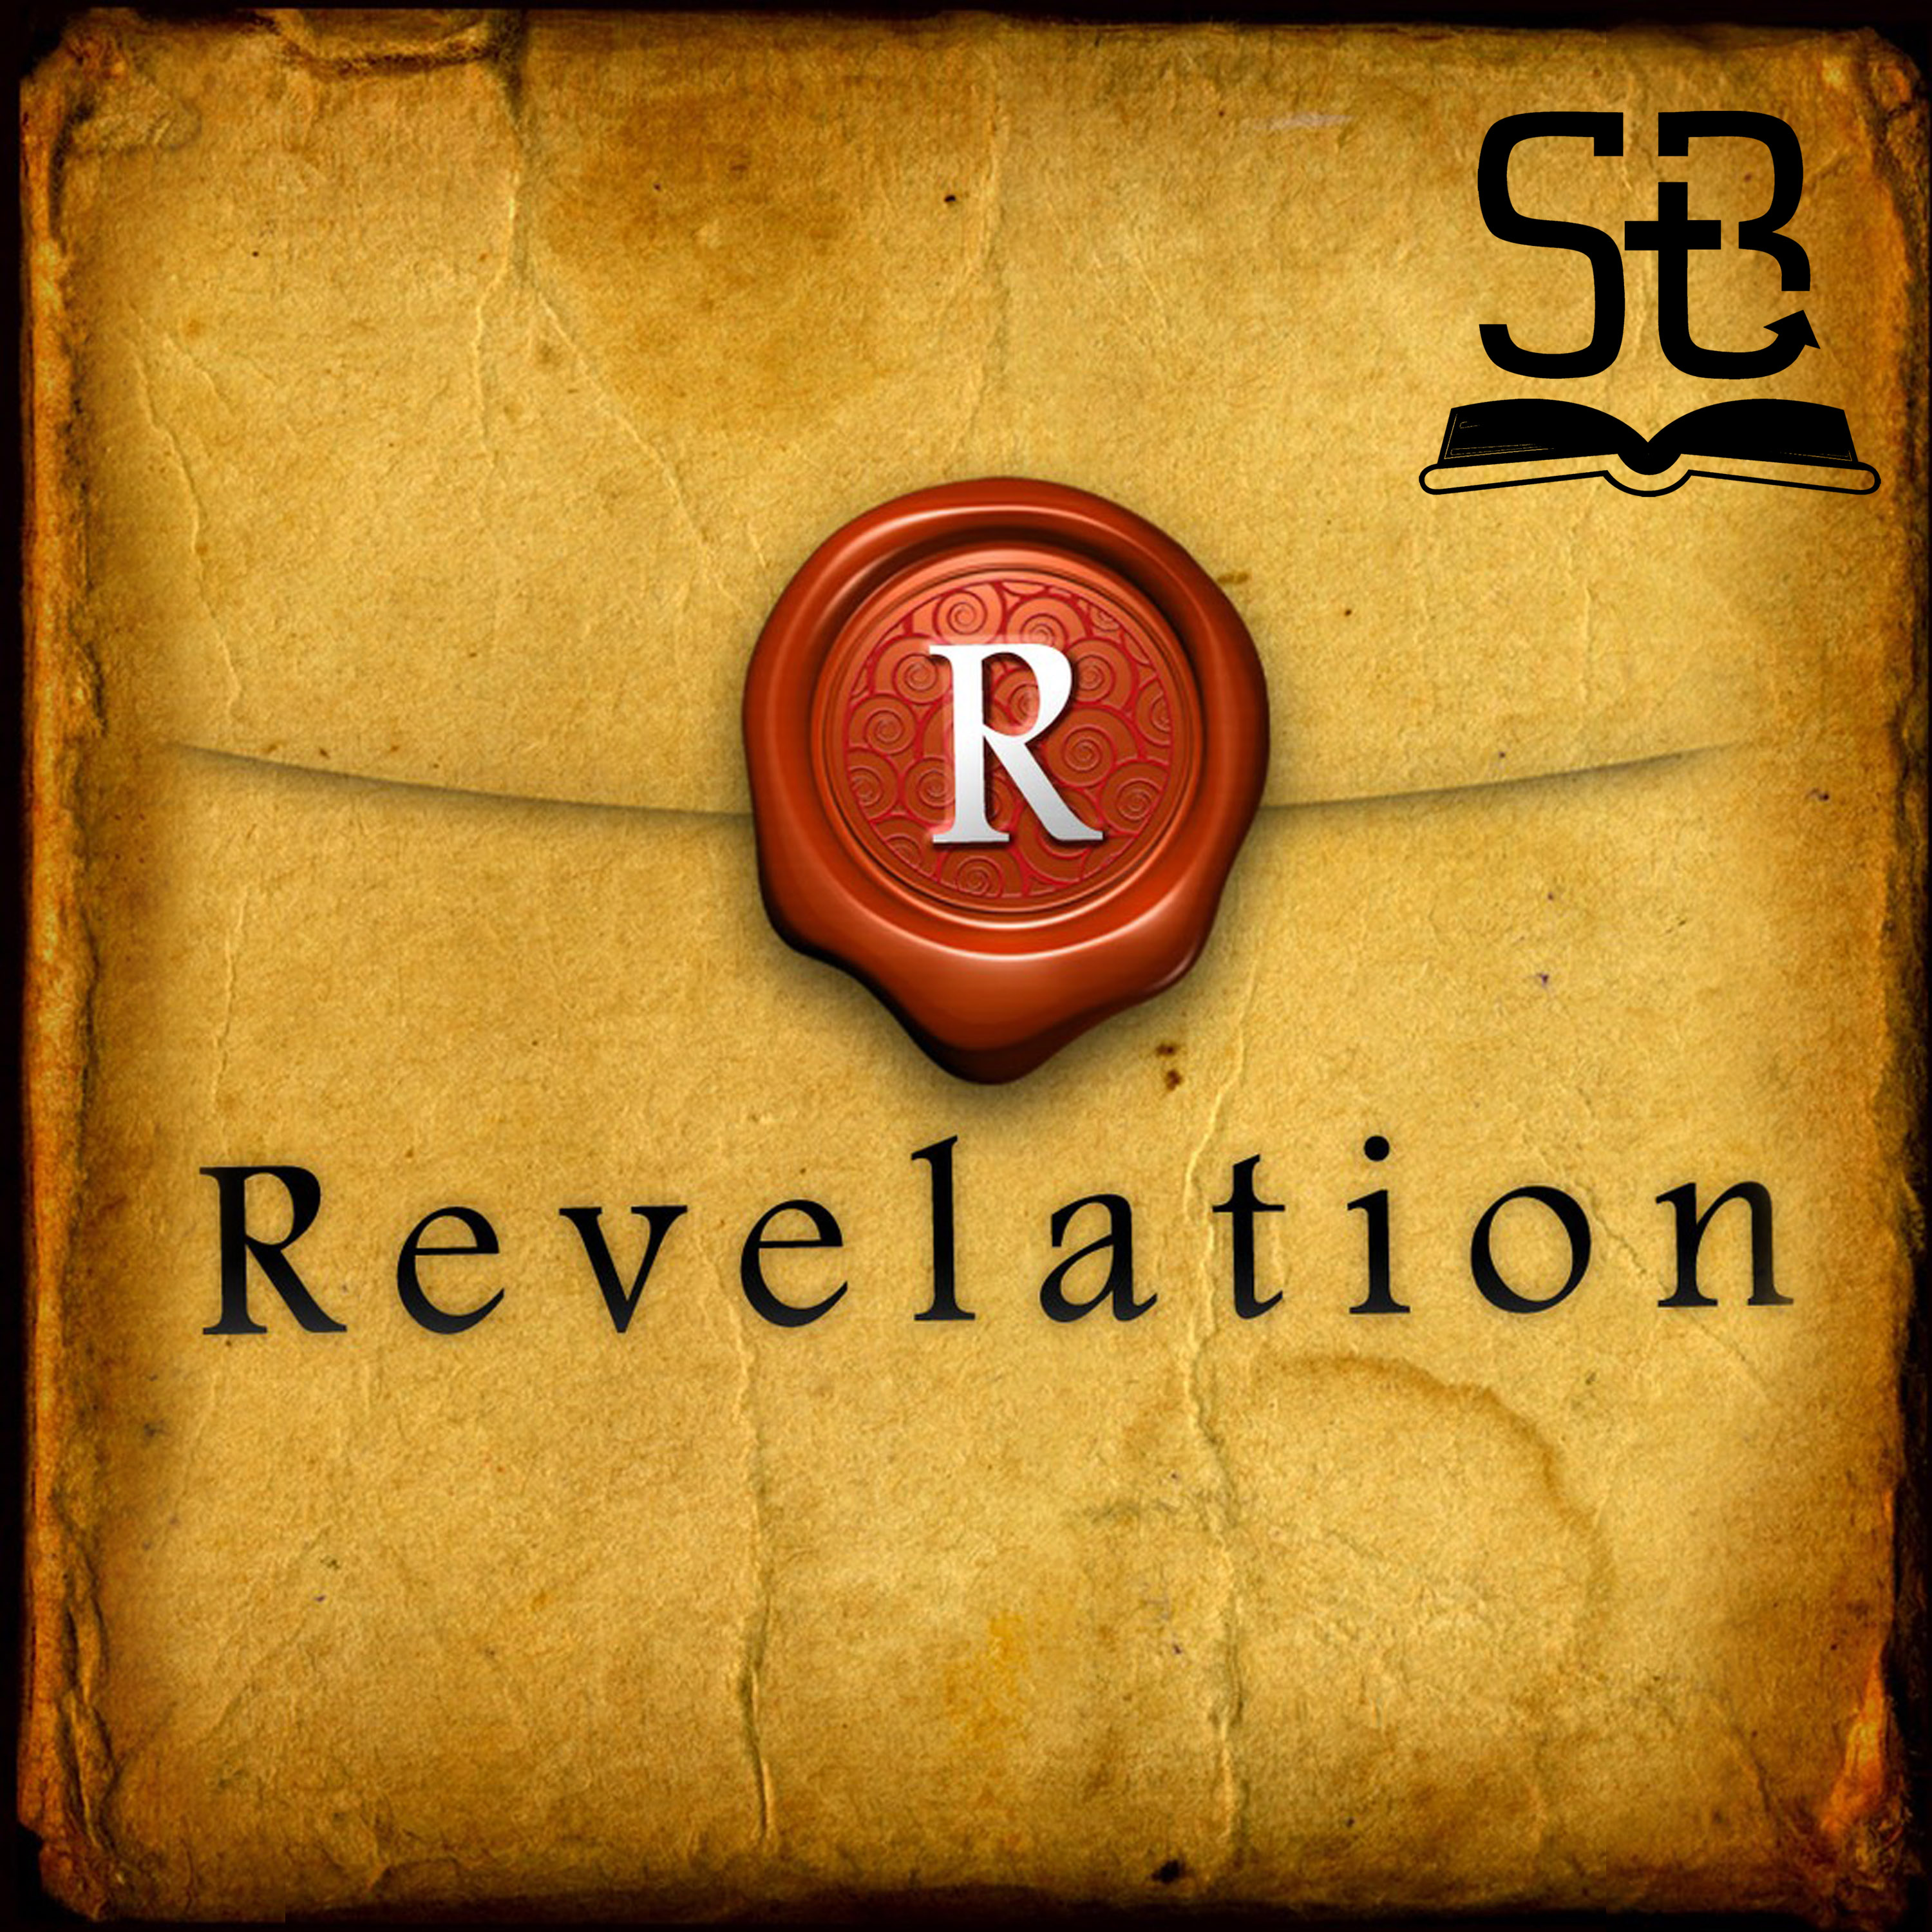 Overview, The Book of Revelation